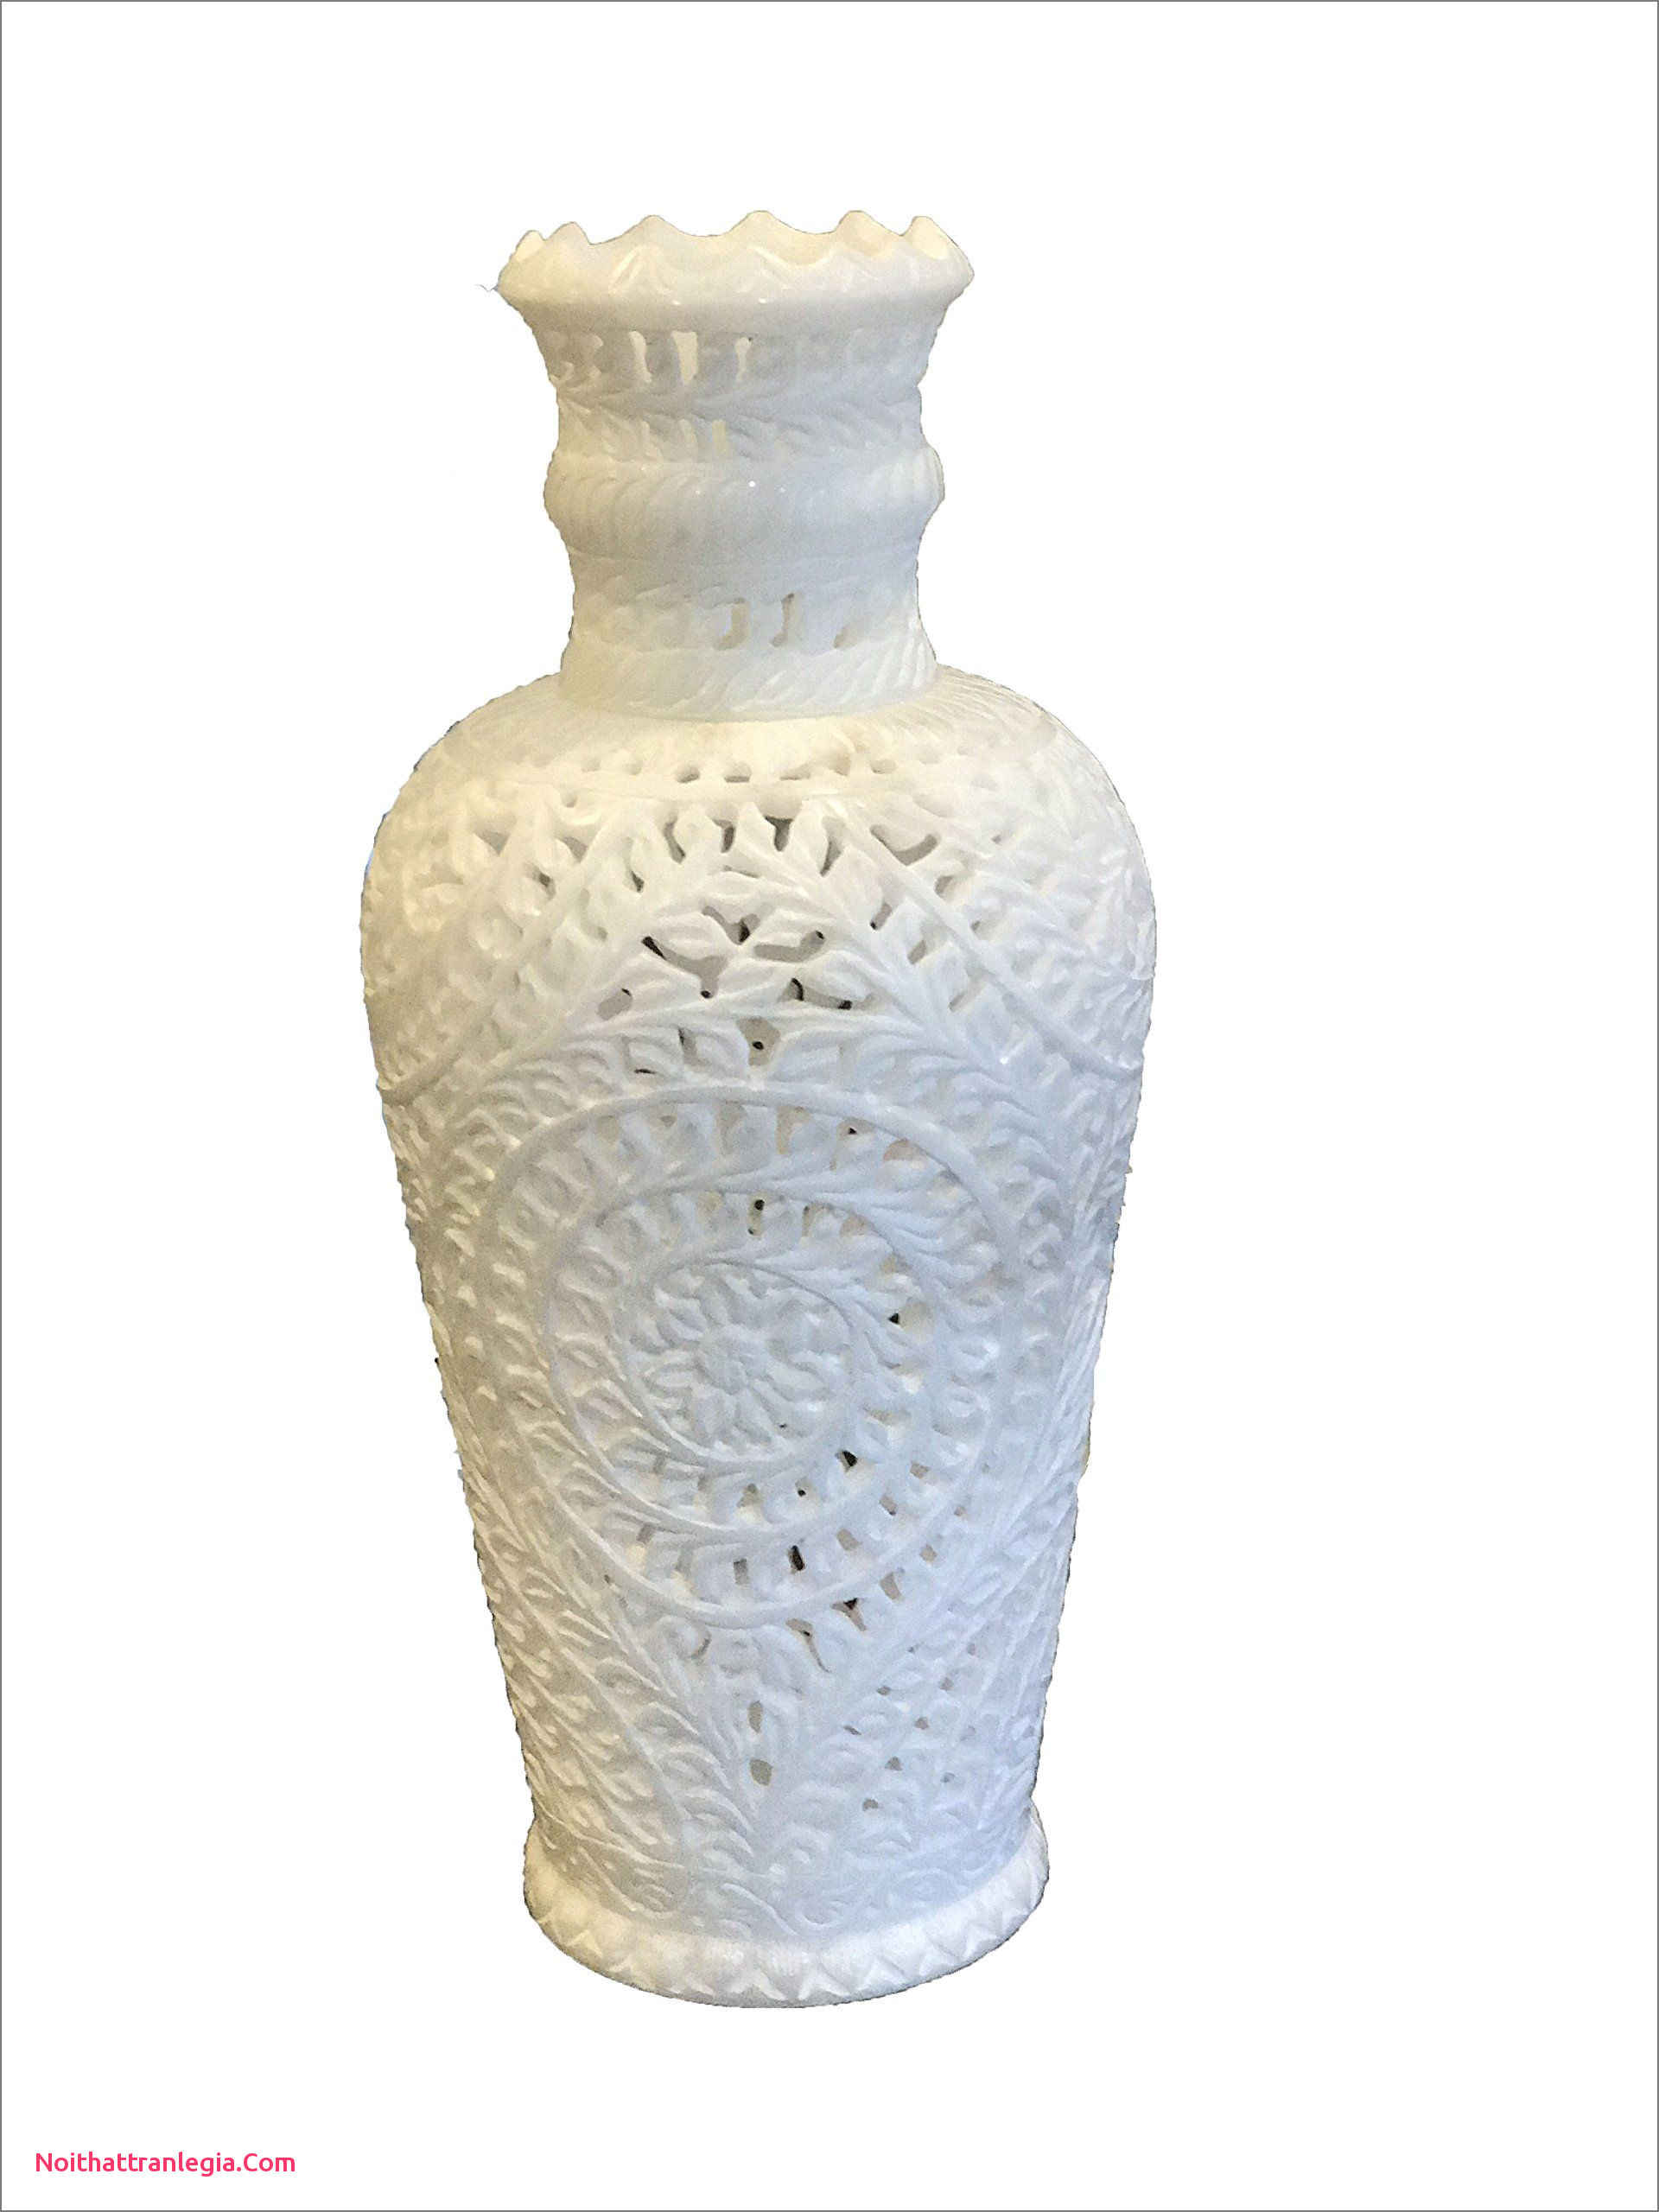 white big vase of 20 how to clean flower vases noithattranlegia vases design for white marble flower vase handcrafted stone decorative wedding diy vases handcrafted by artisans this